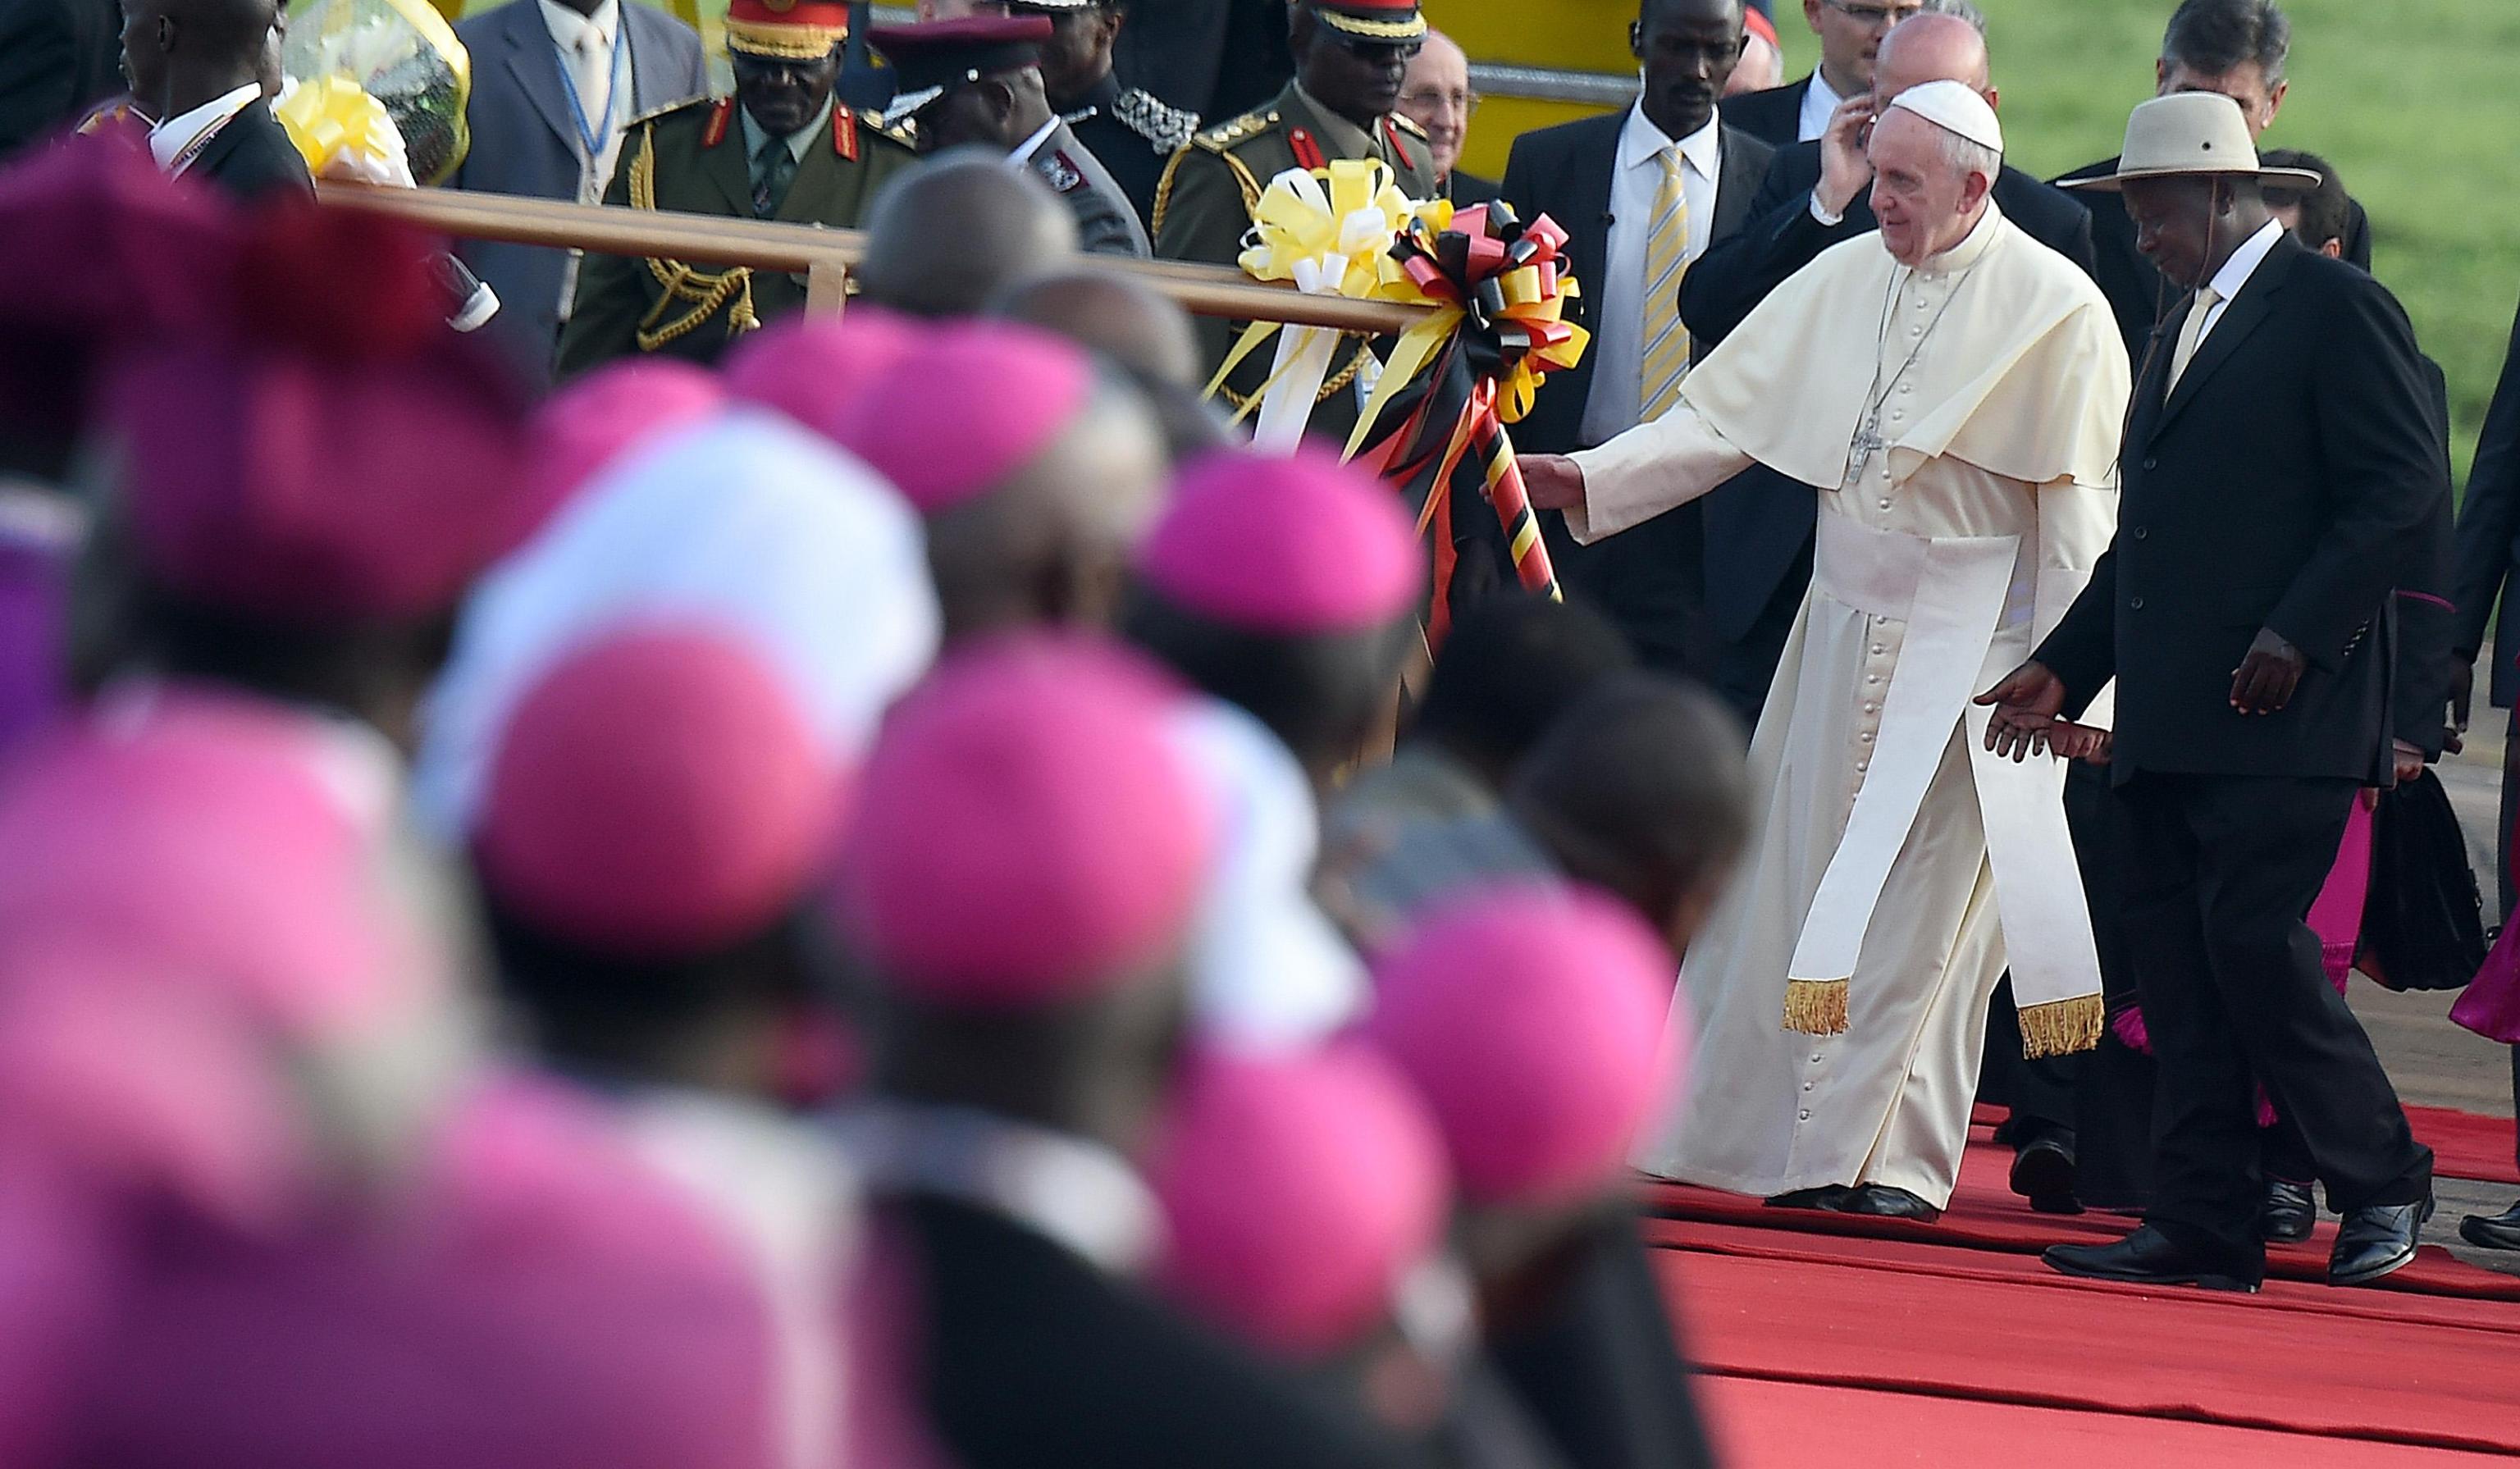 Pope Francis at his arrival at the International Airport of Entebbe